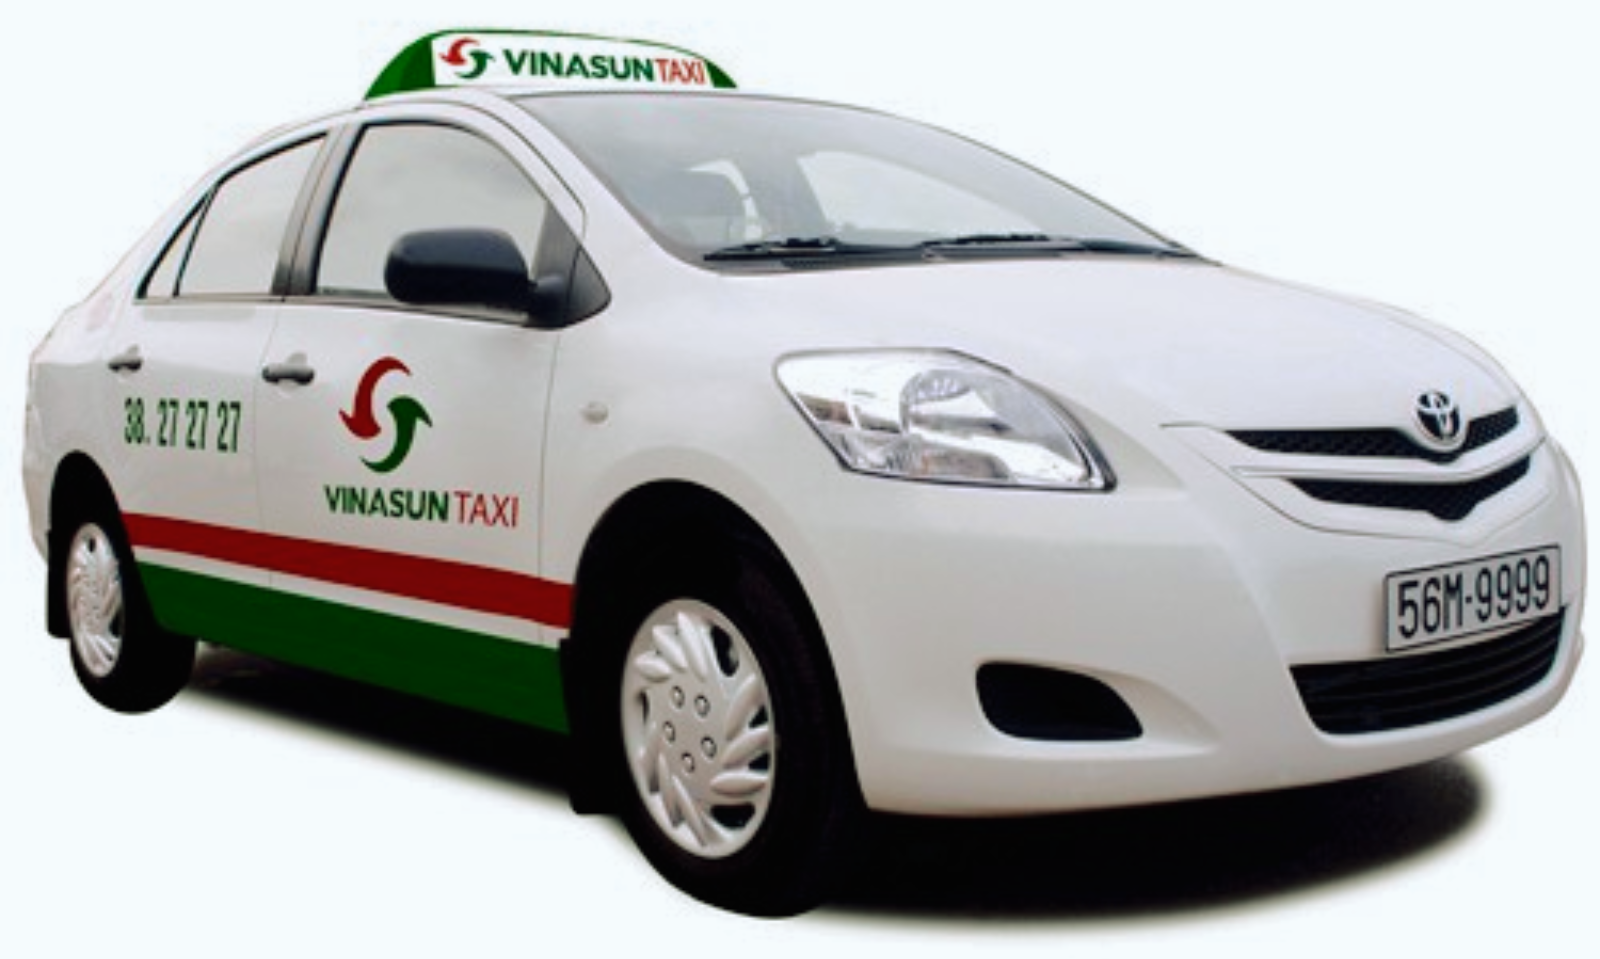 Car Rental In Vietnam Compared And Updated